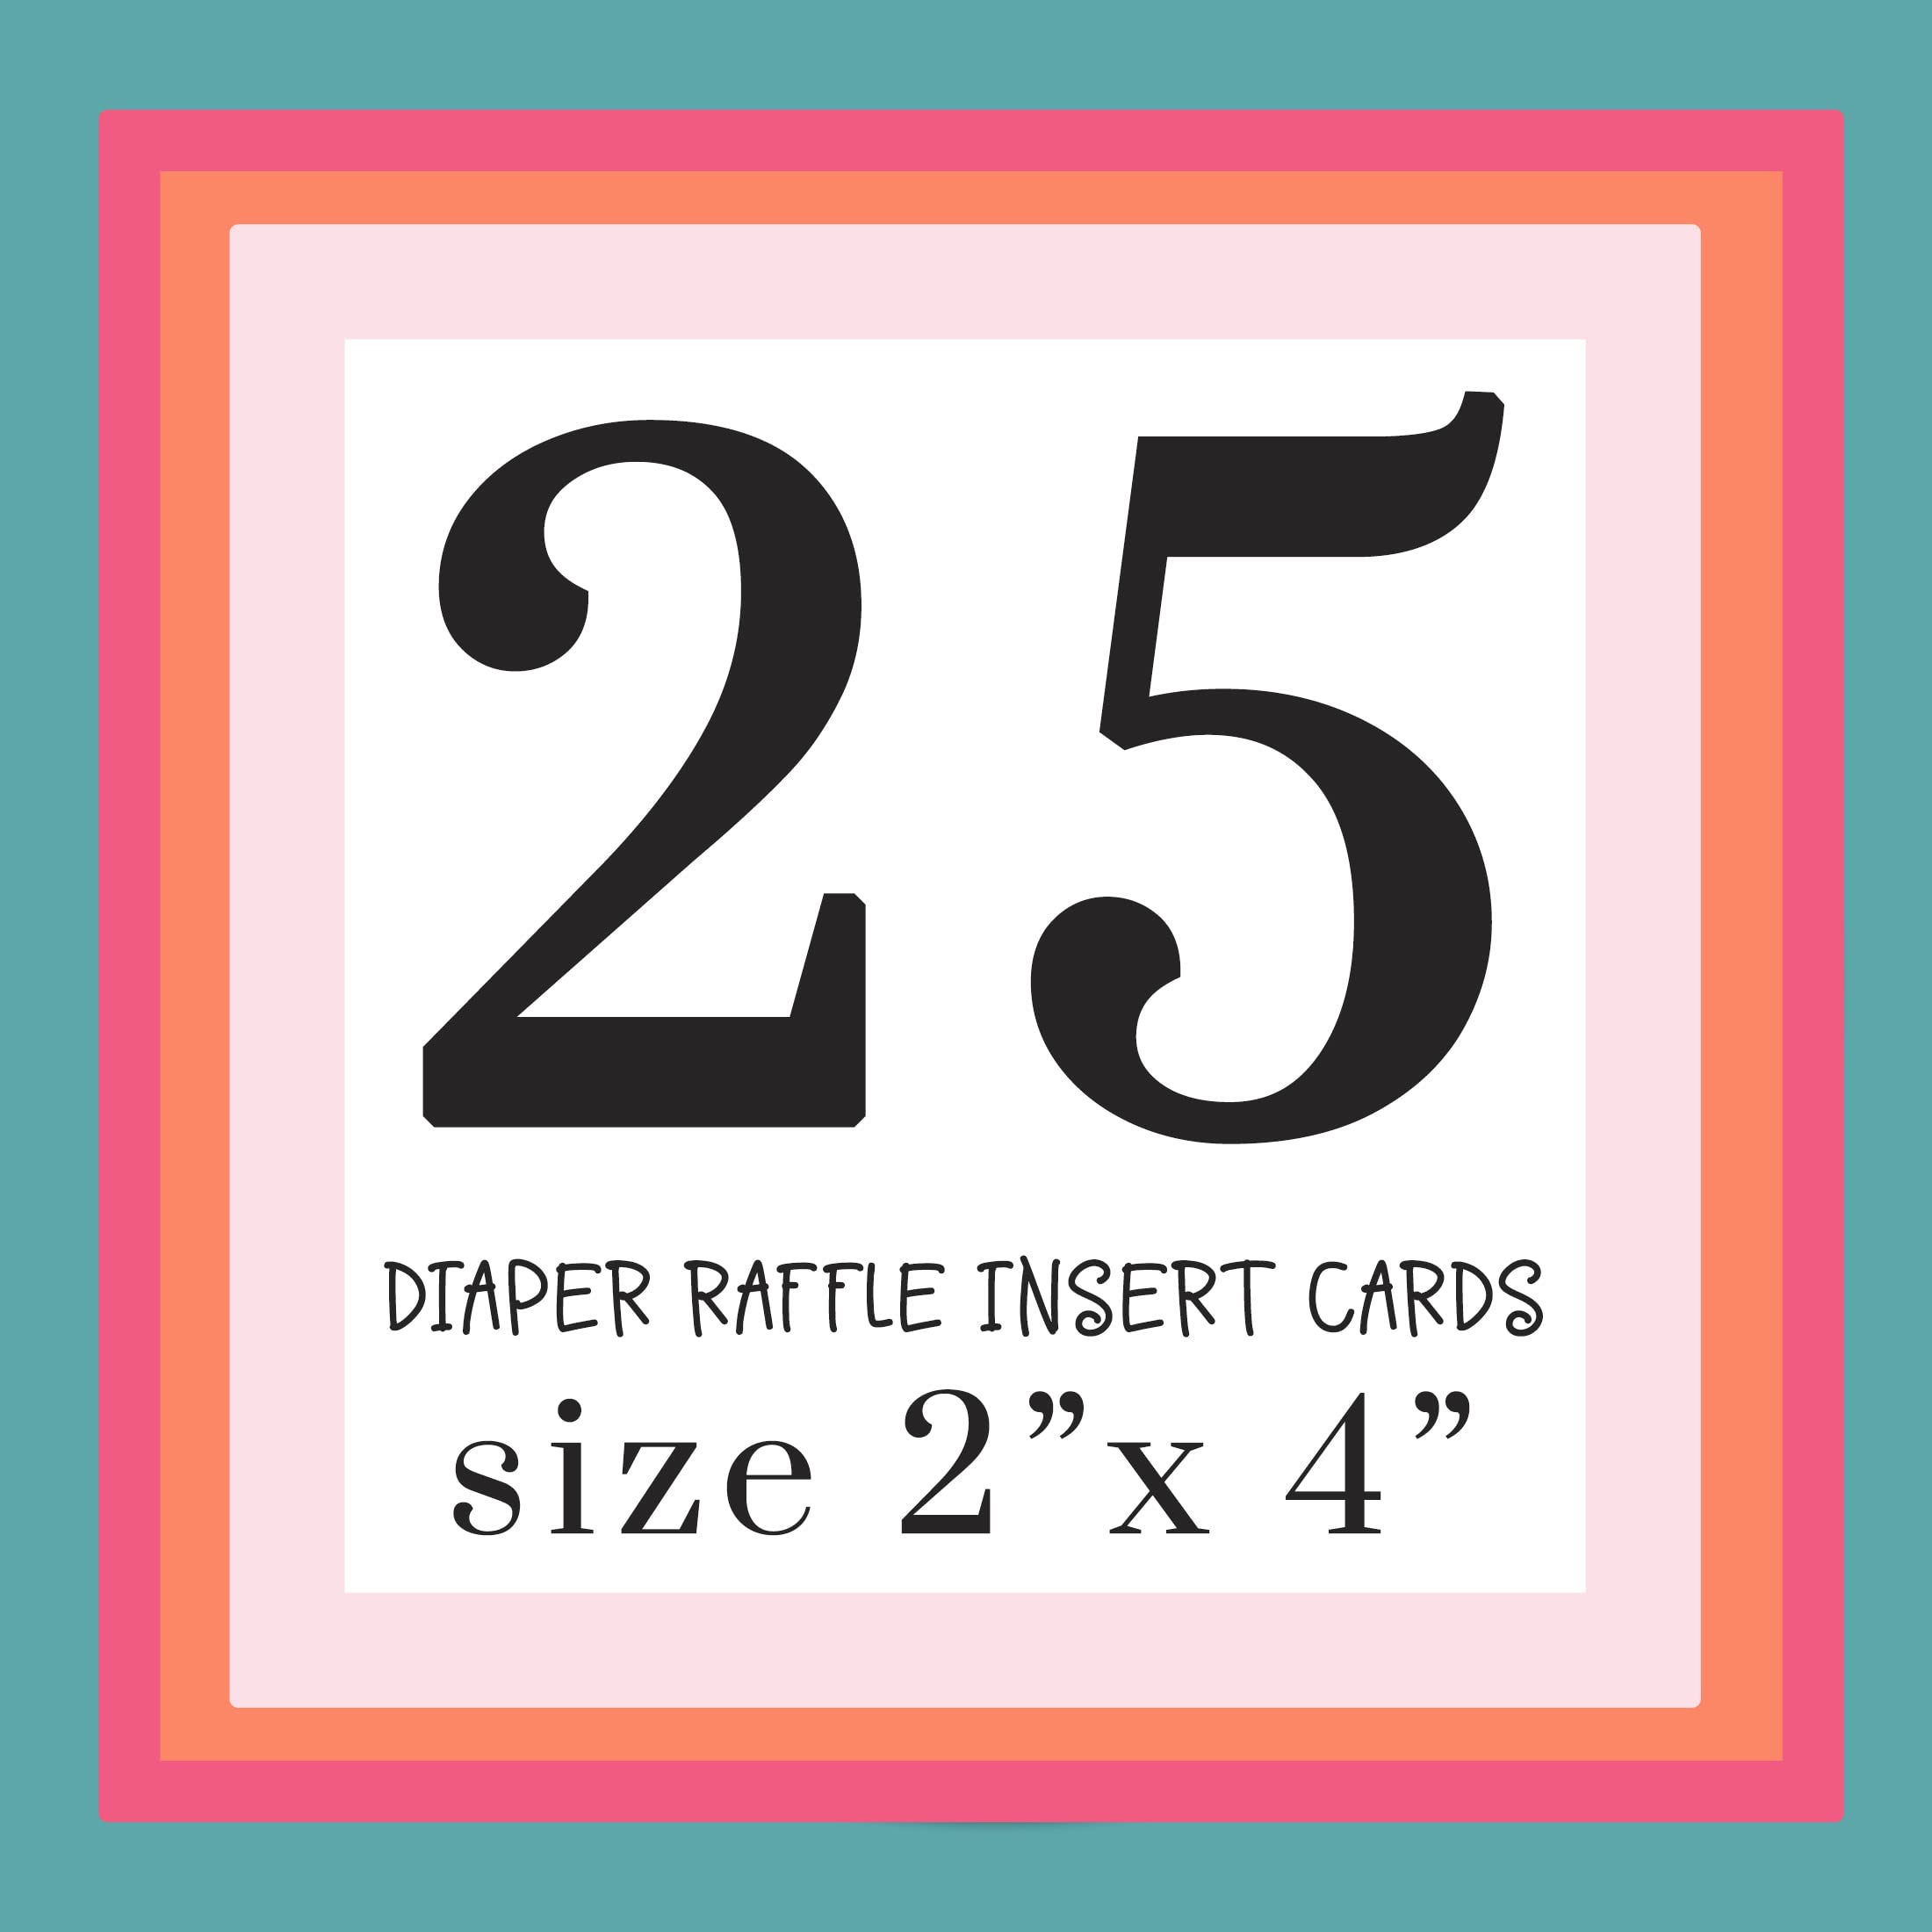 Pumpkin Diaper Raffle Tickets (25 Pack) Baby Shower Games Halloween – Floral Invitation Insert Cards - Guests Fill-In to Win Prize Drawings - Size 2x4